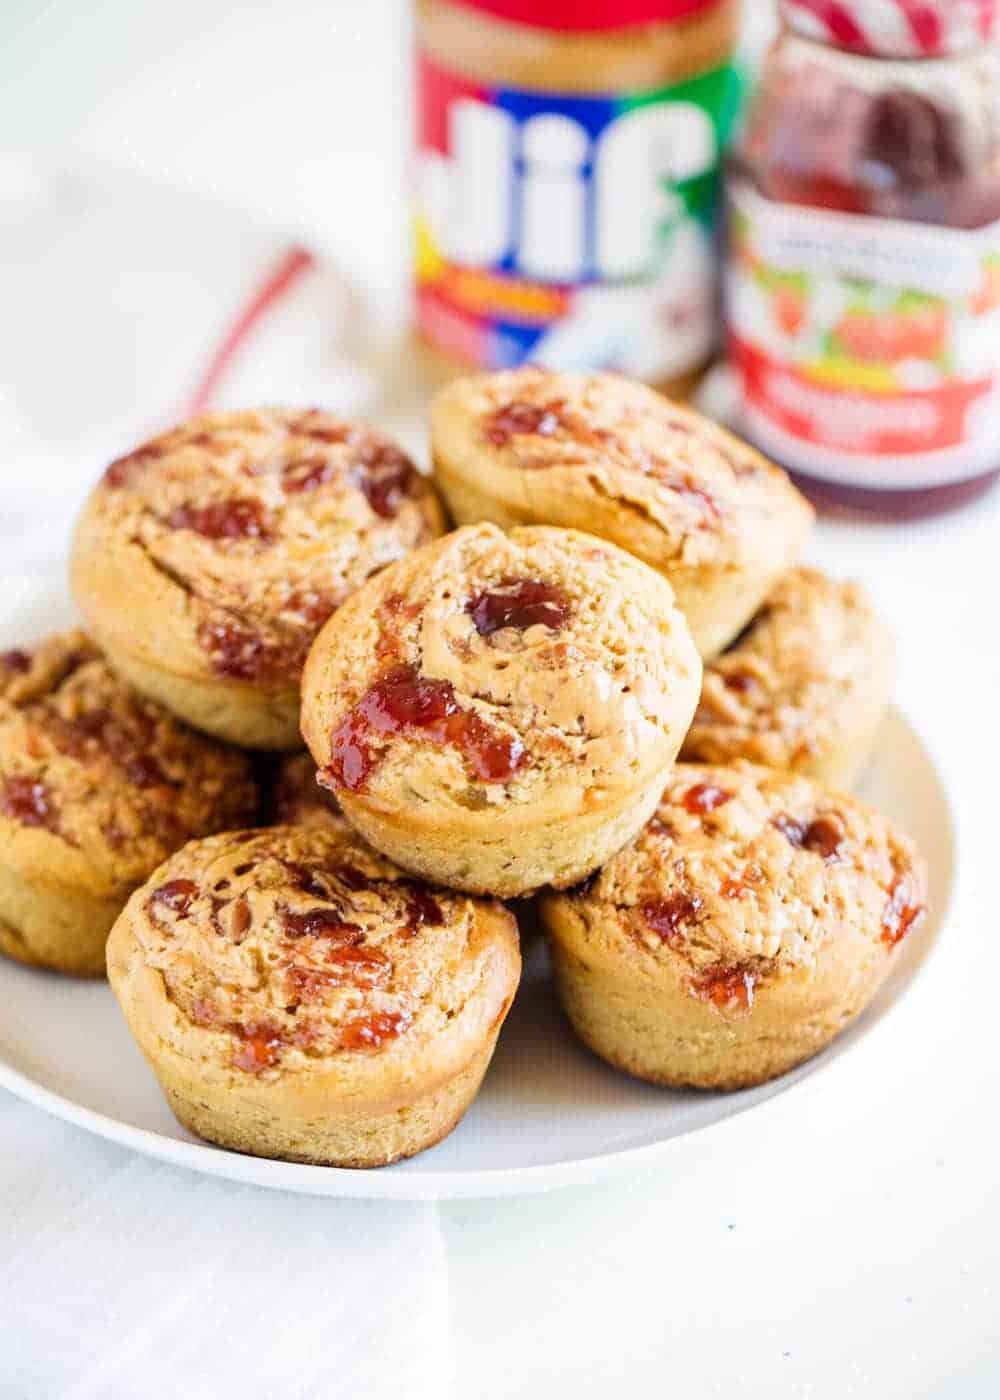 Plate full of peanut butter and jelly muffins.